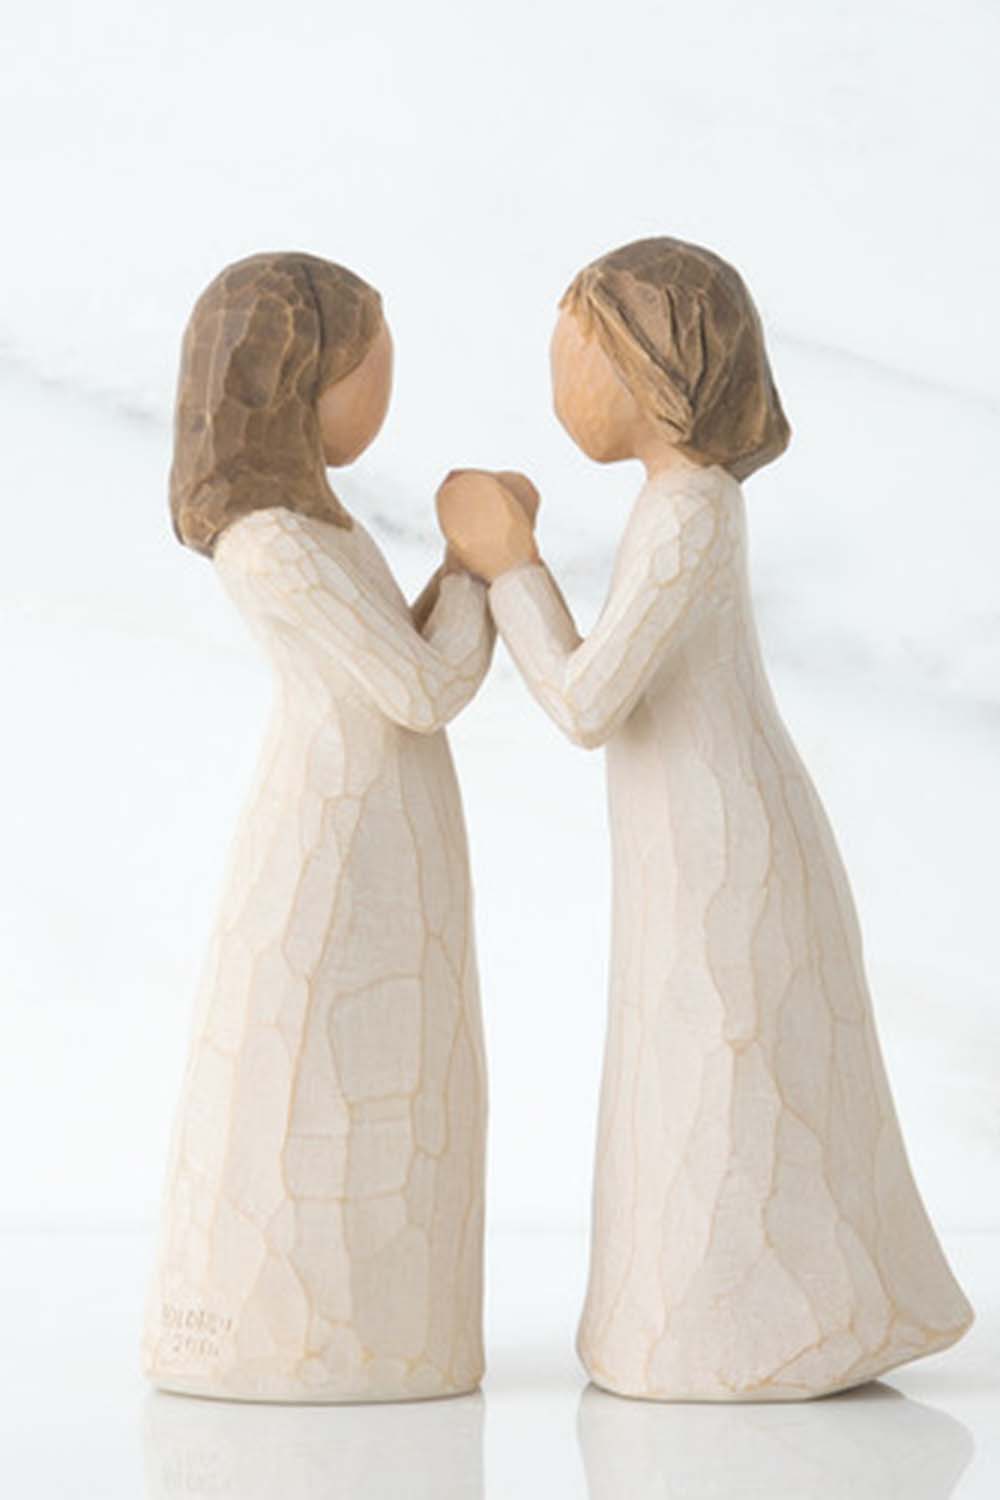 Willow Tree Figure - Sisters by Heart